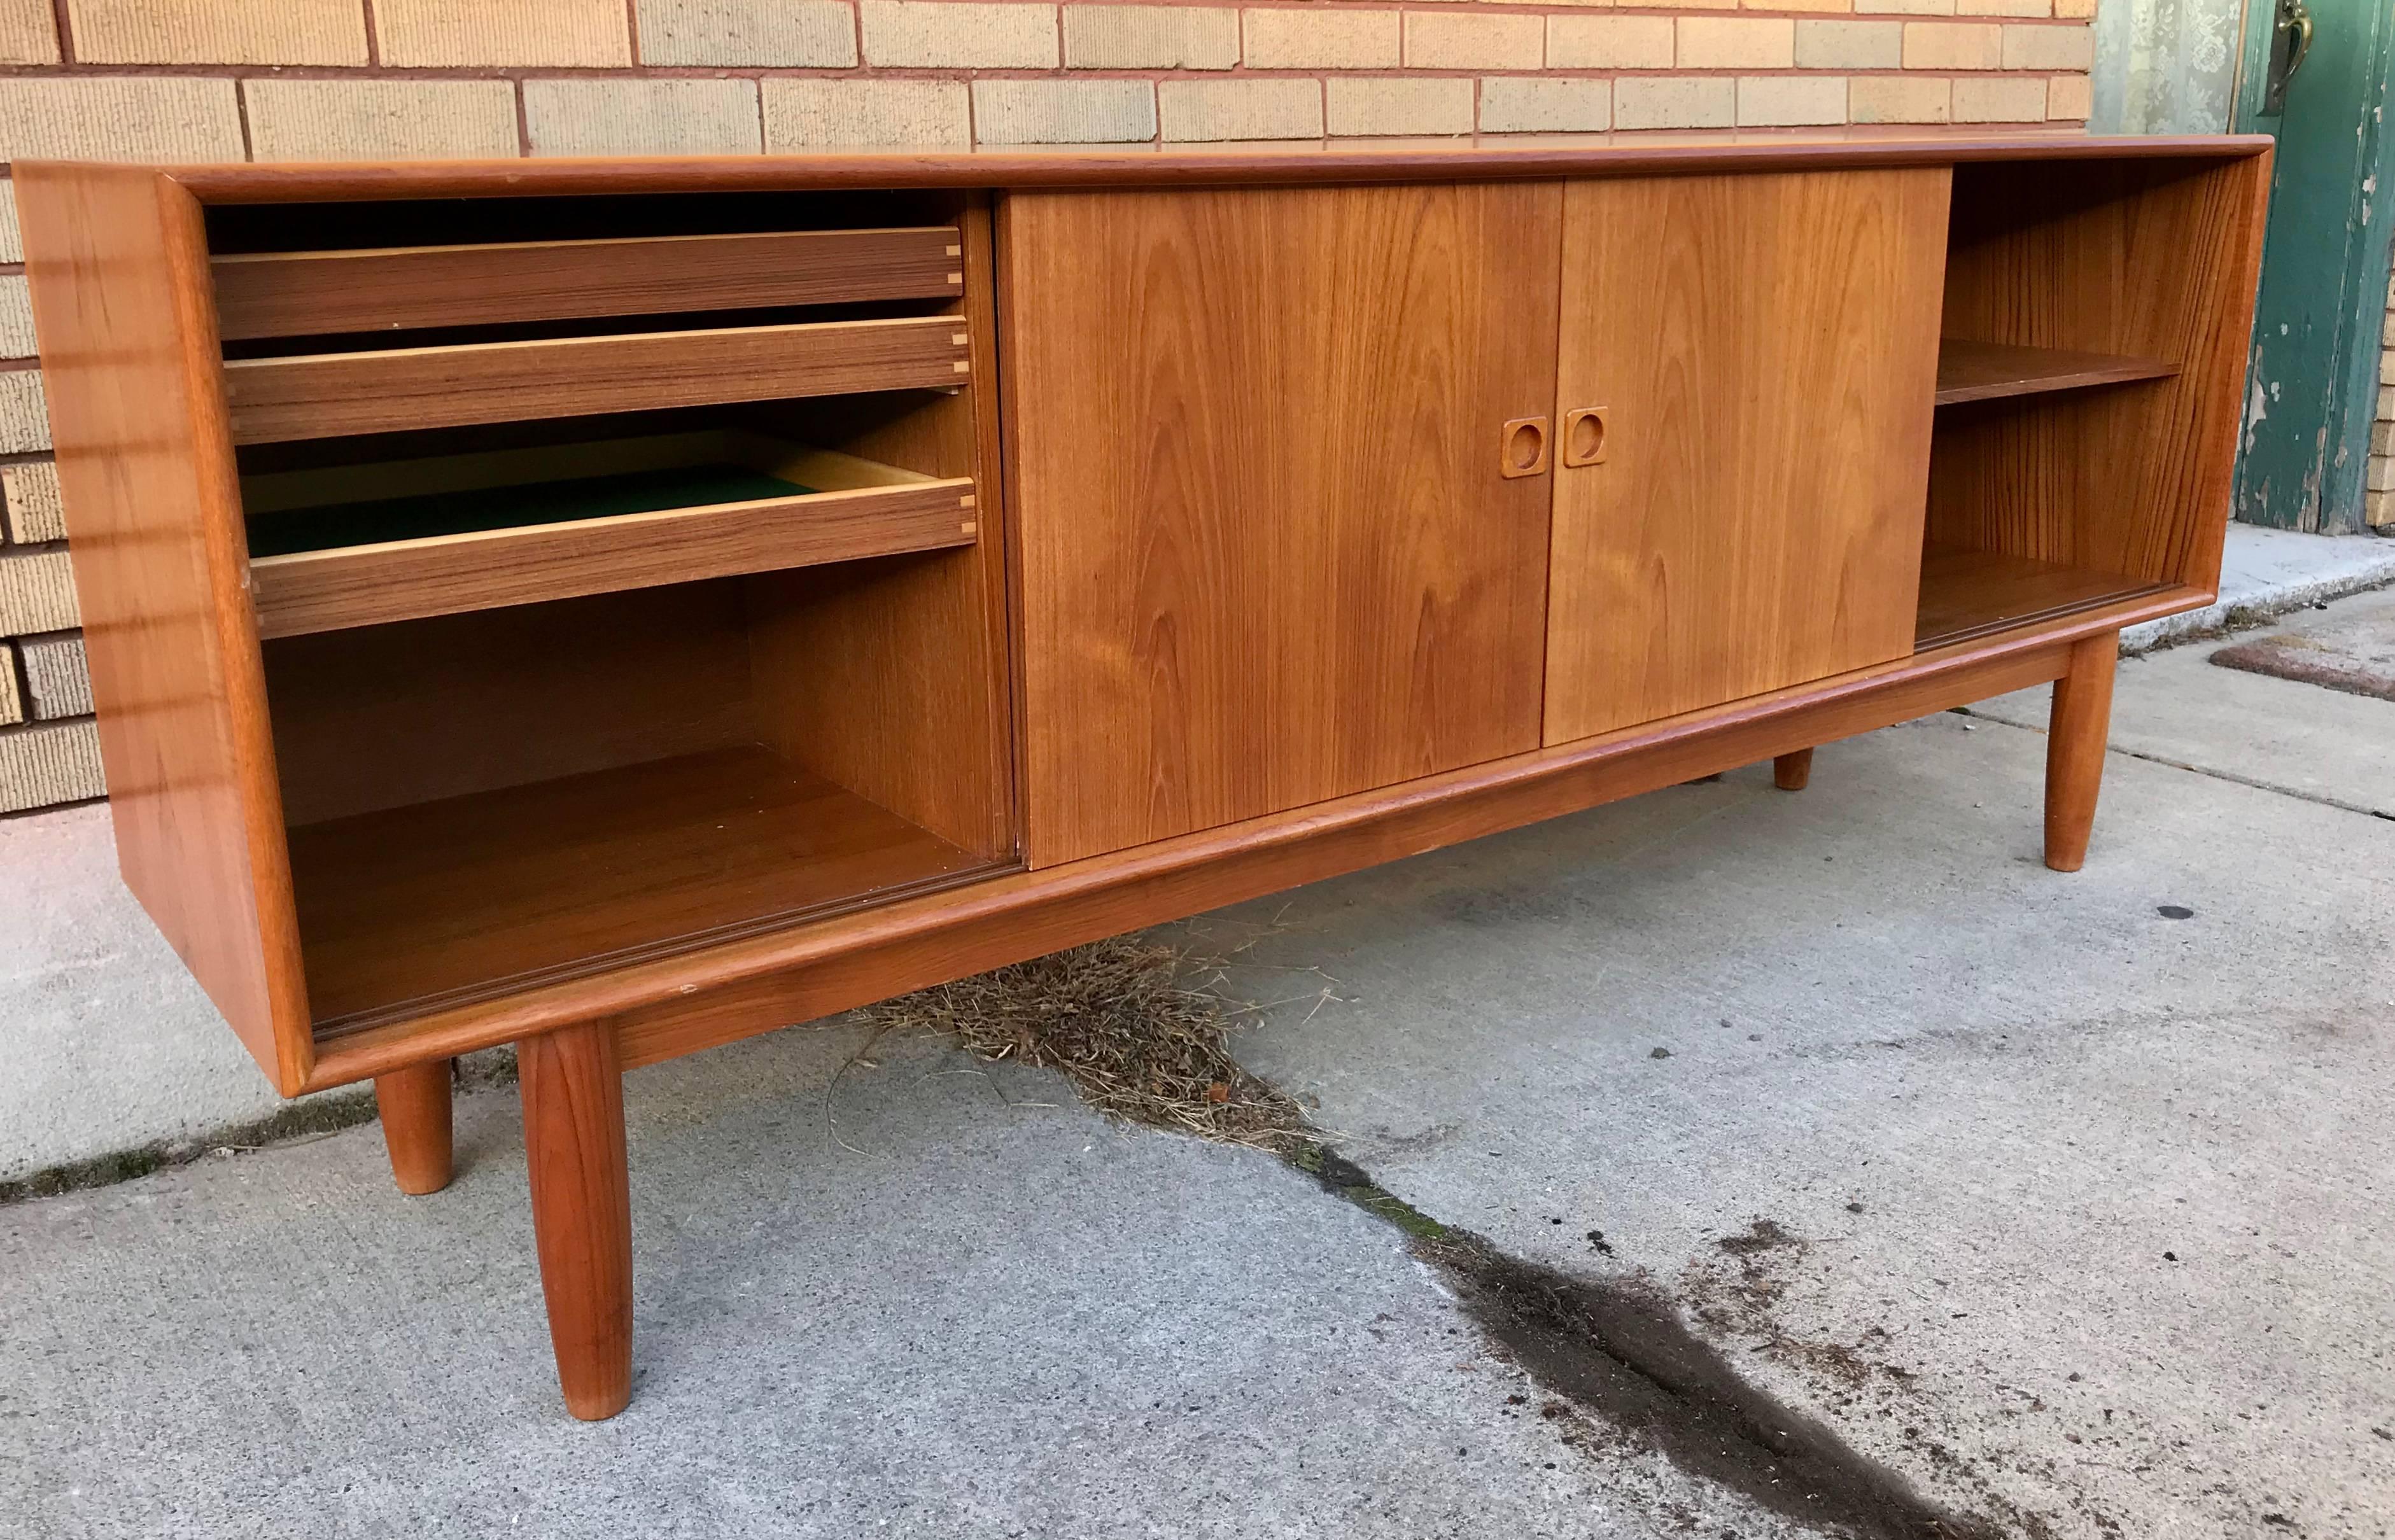 Teak Classic Danish Modern Credenza or Sideboard by Illum Wikkelso